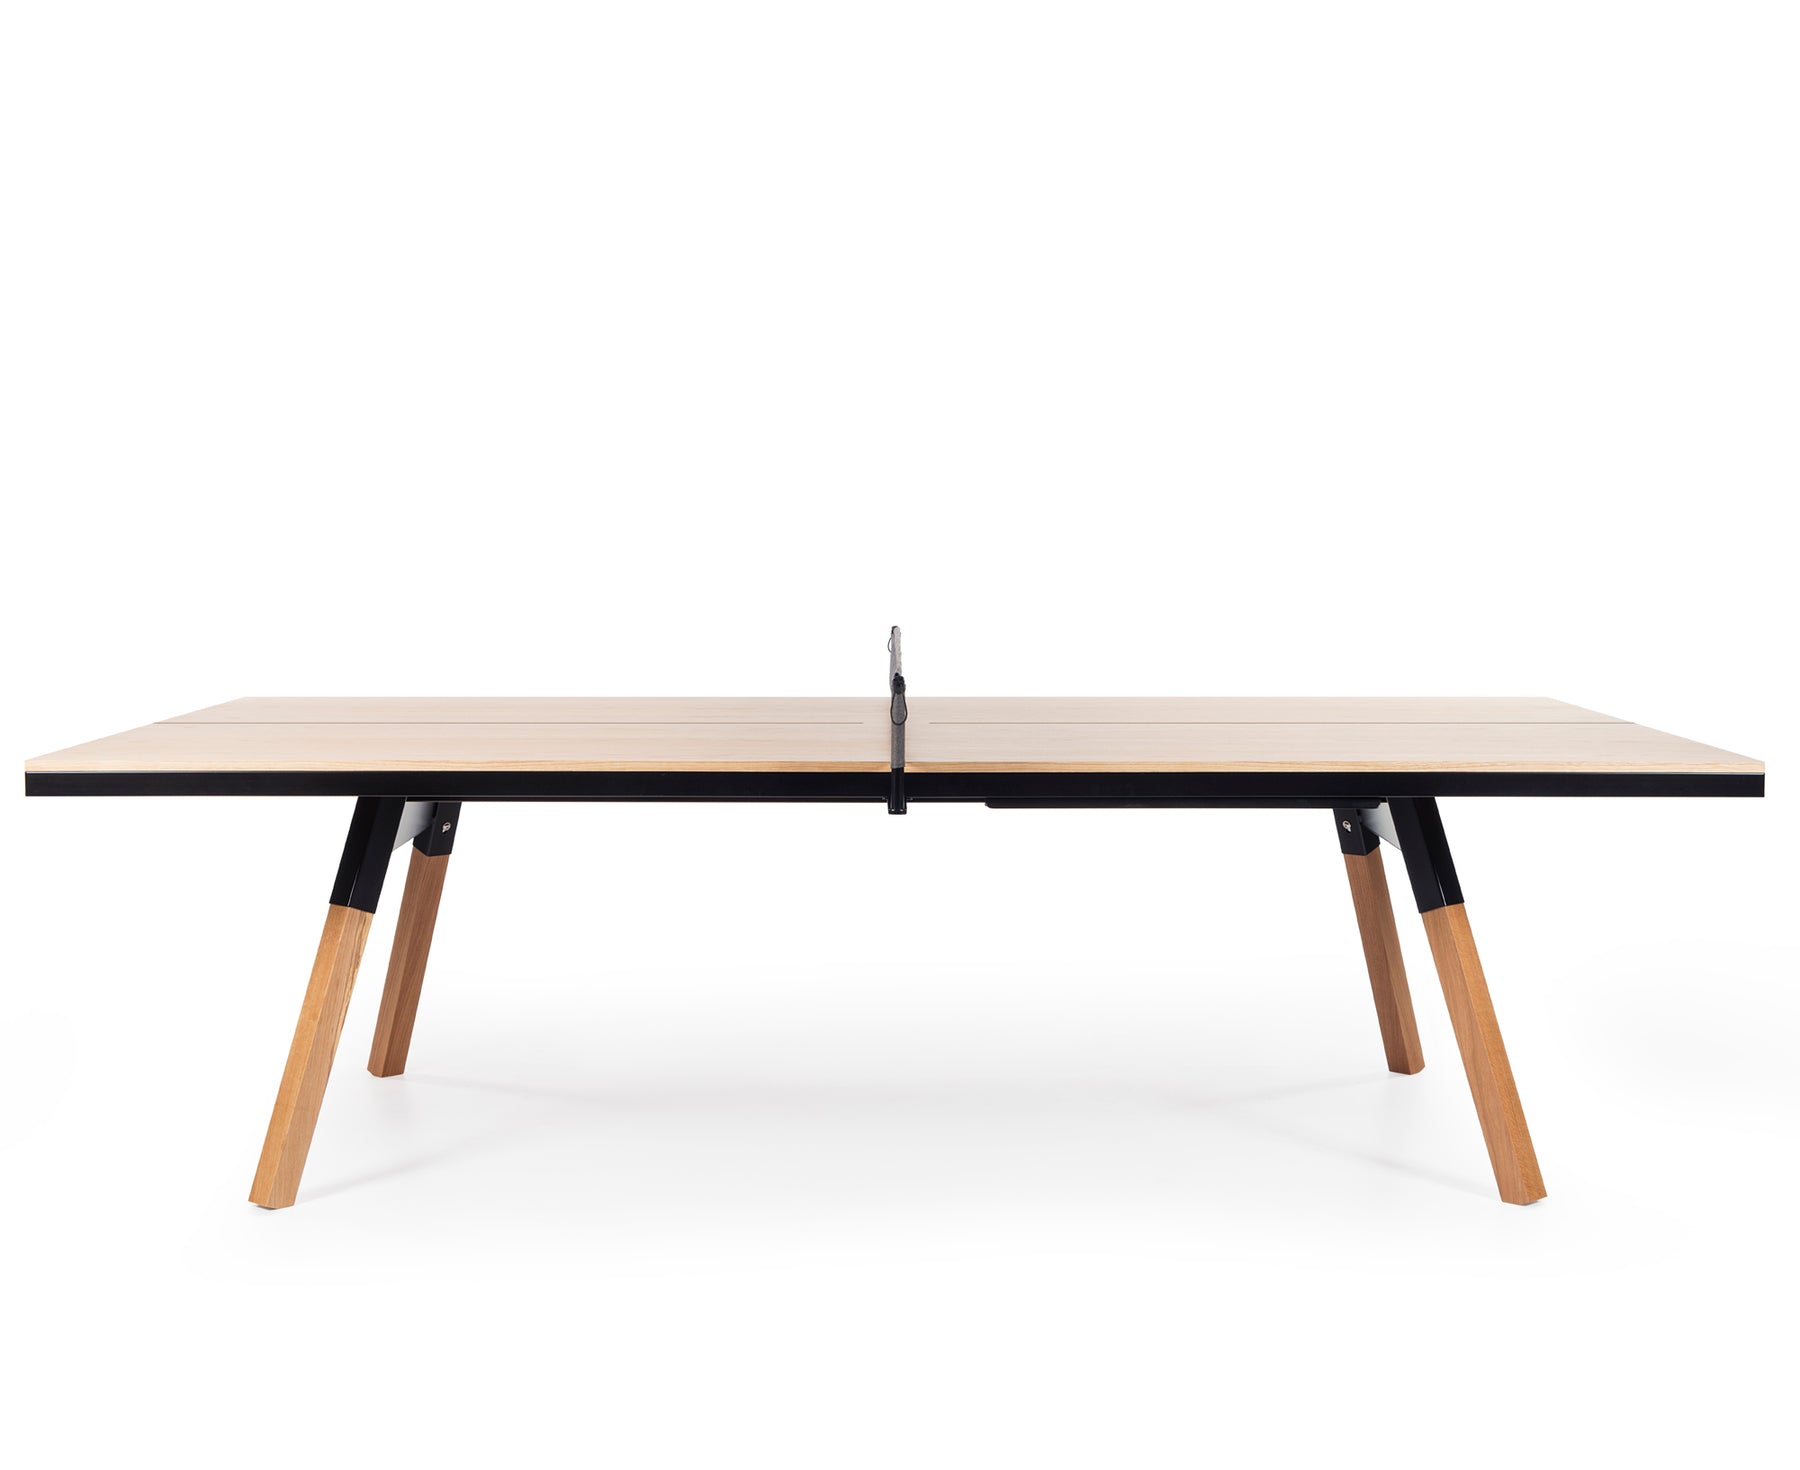 You & Me Ping Pong Table | DSHOP